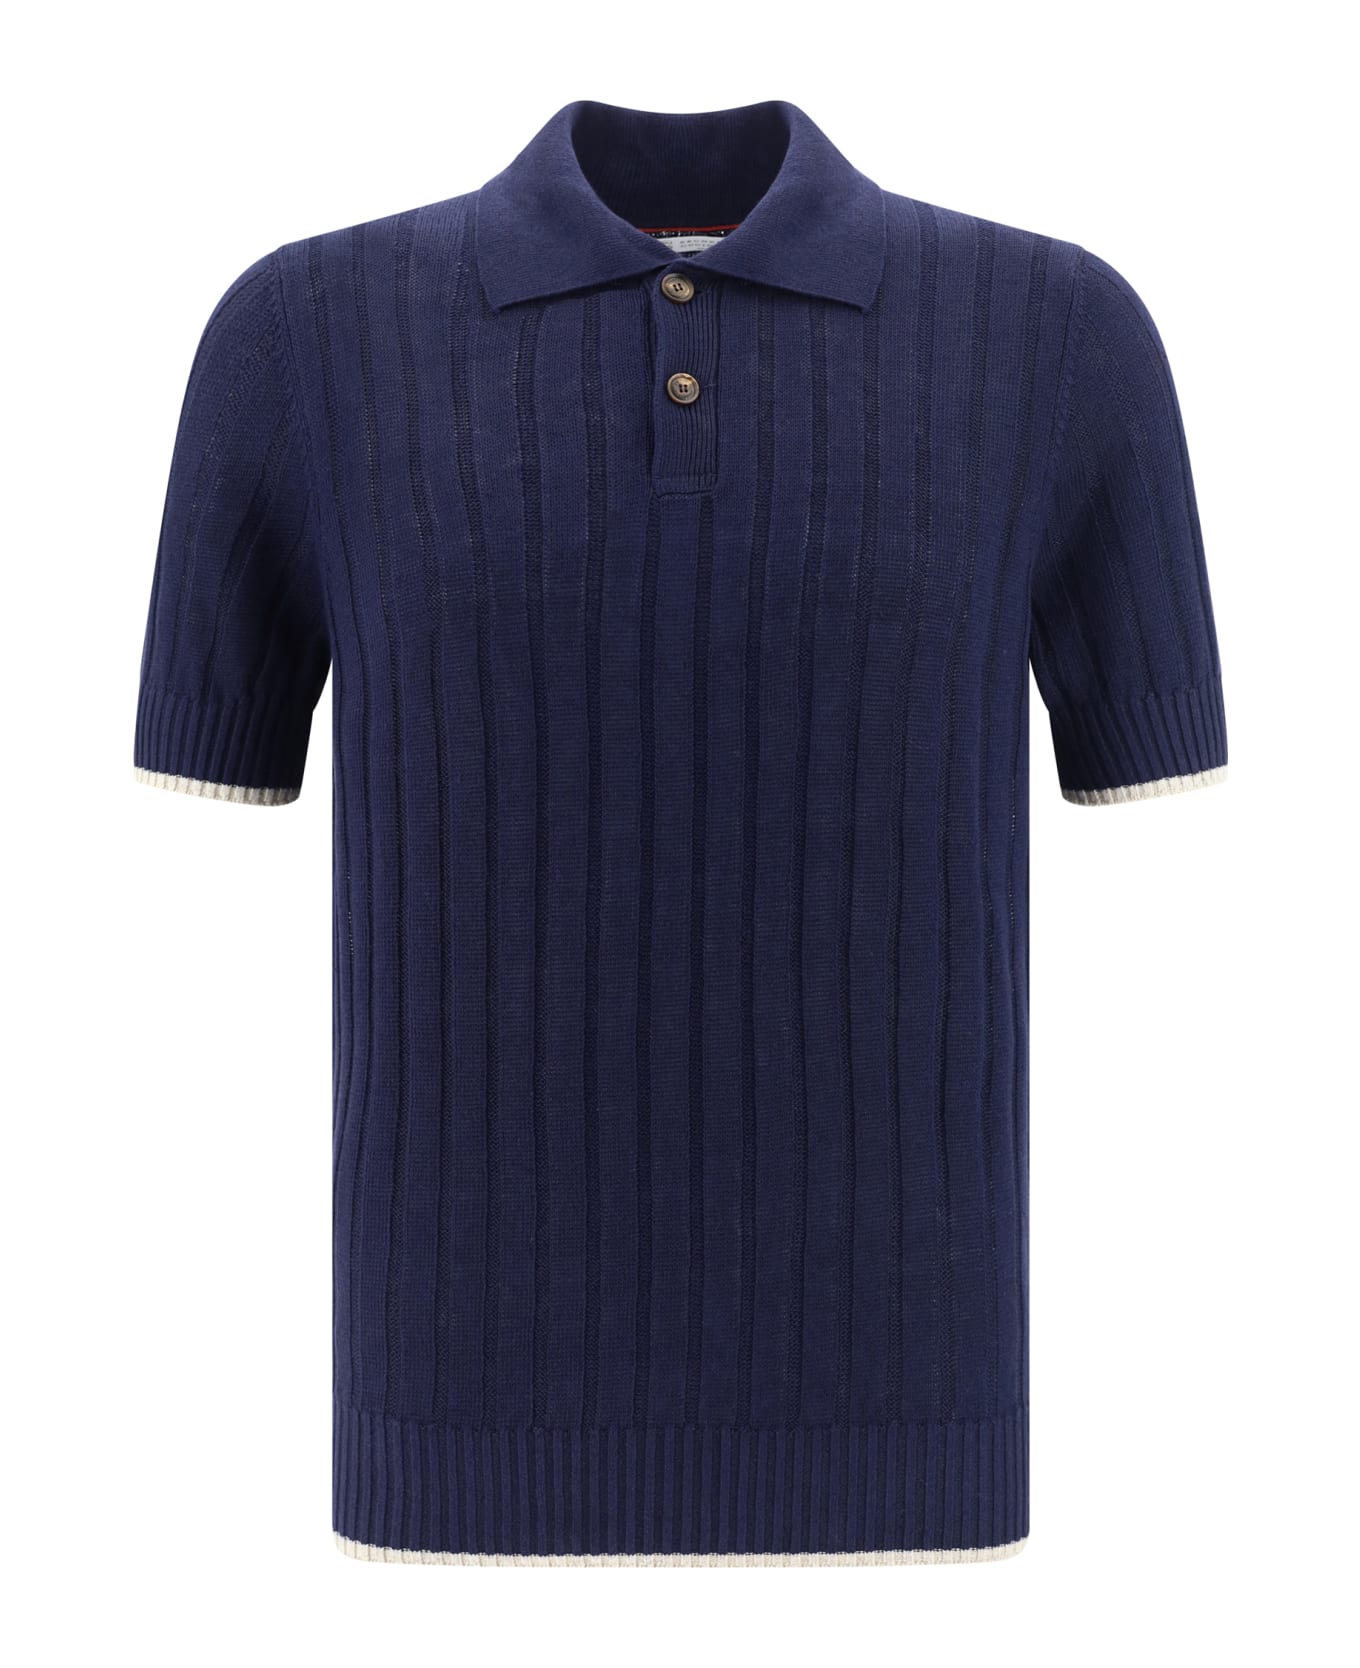 Brunello Cucinelli Polo Shirt - Navy+oyster ポロシャツ